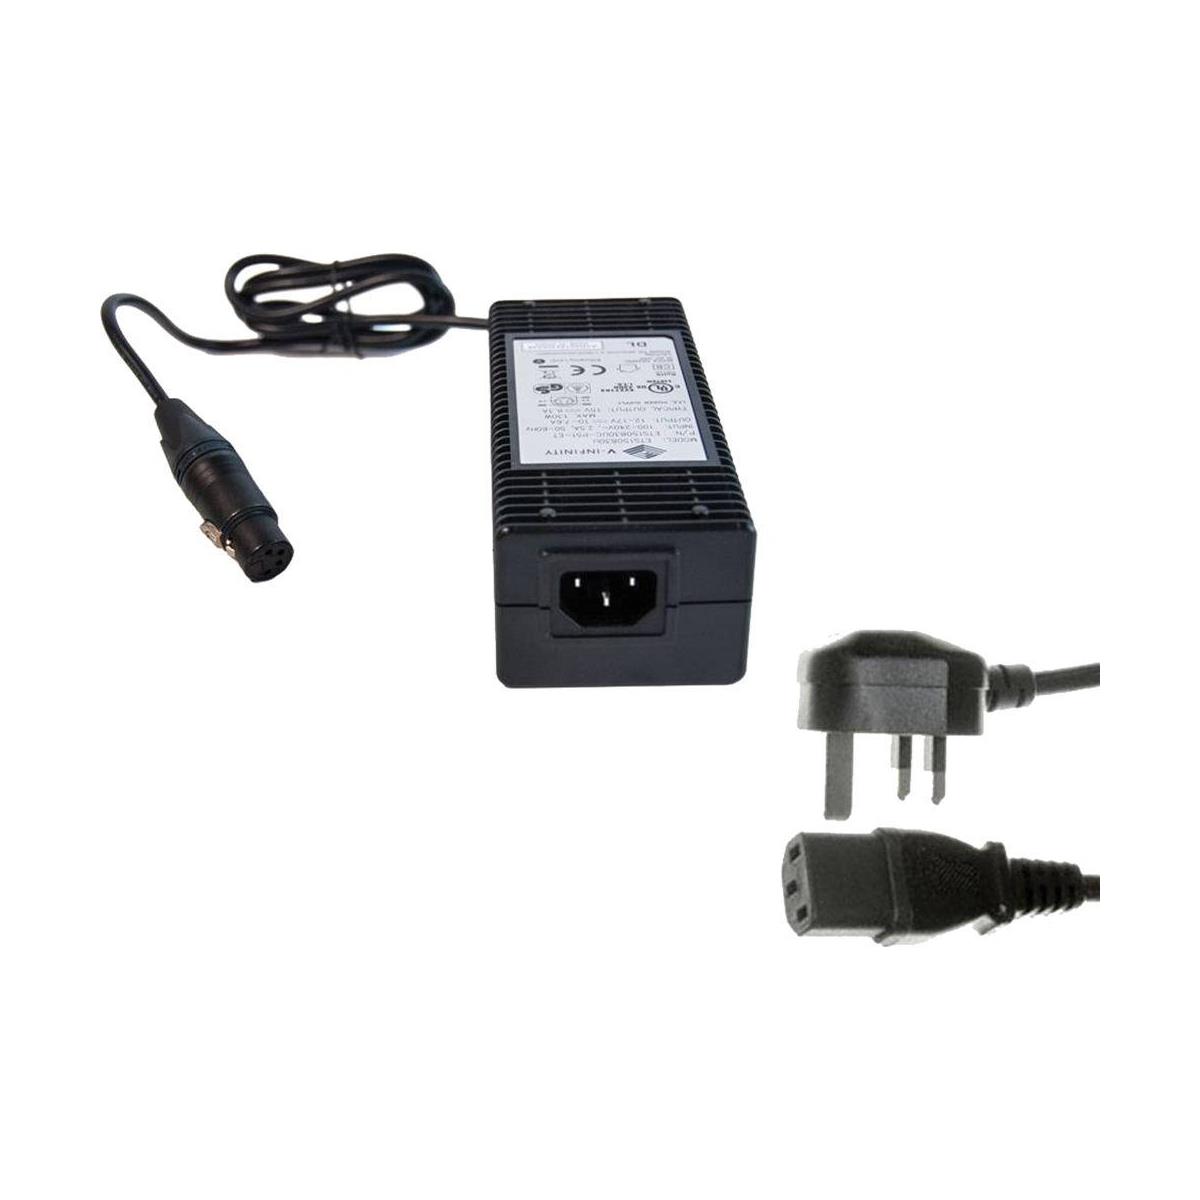 Image of Zylight Universal AC Adapter for F8 LED Fresnel with European Power Cord